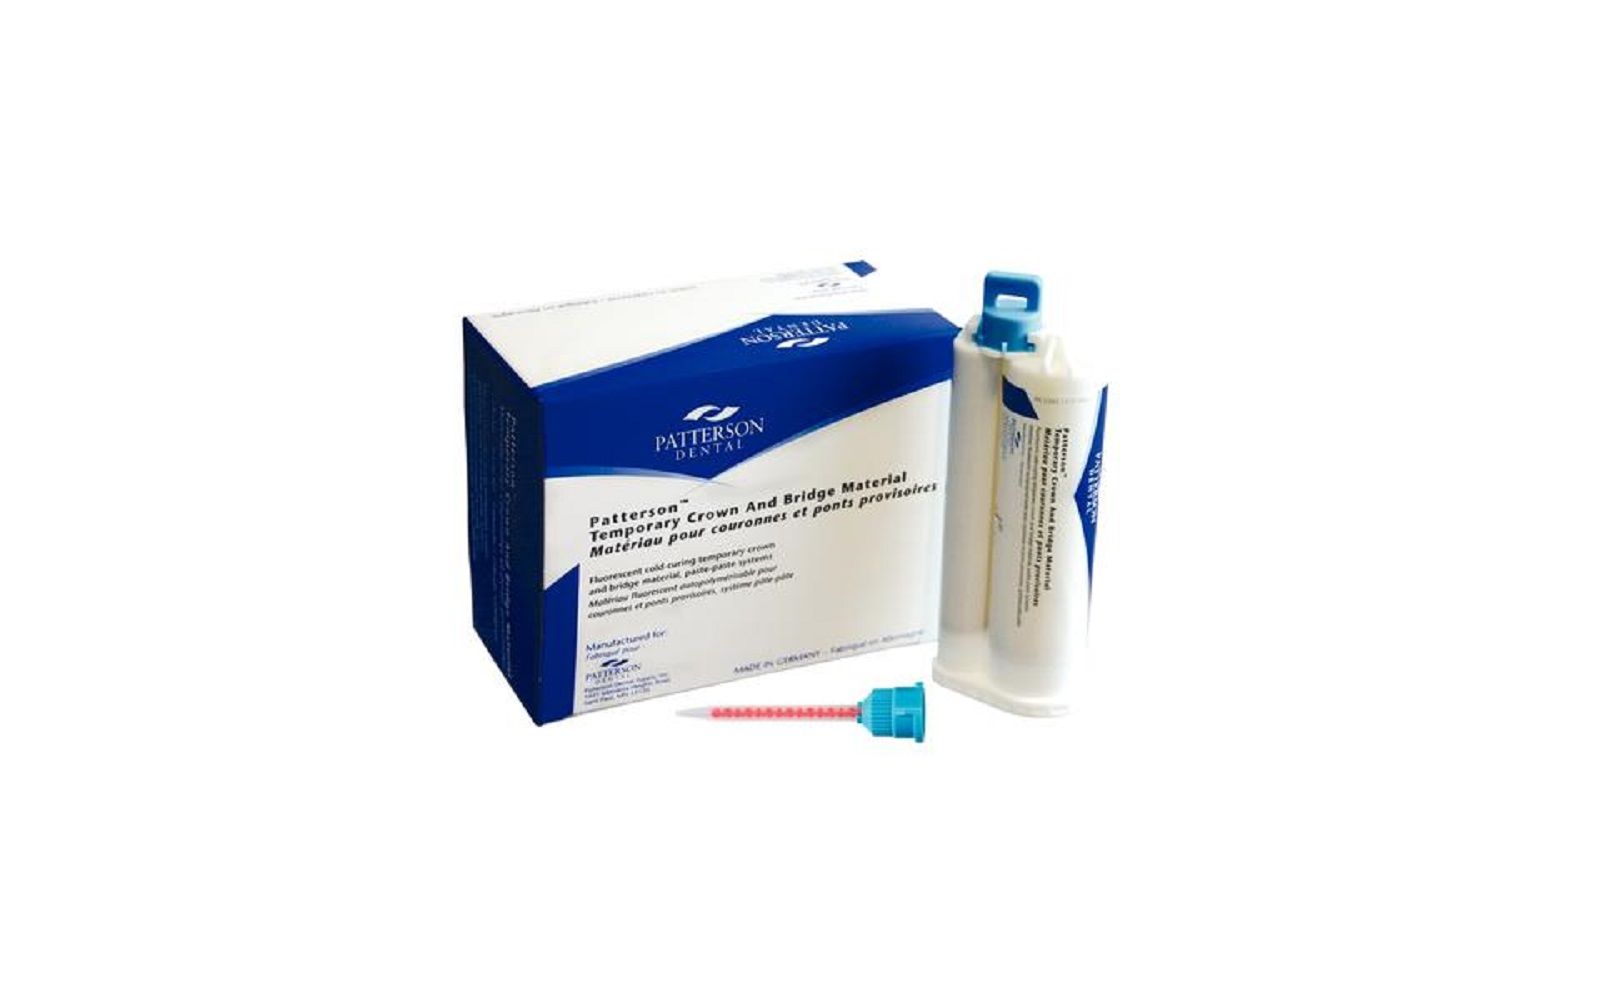 Patterson® temporary crown and bridge material introductory kit - patterson dental supply